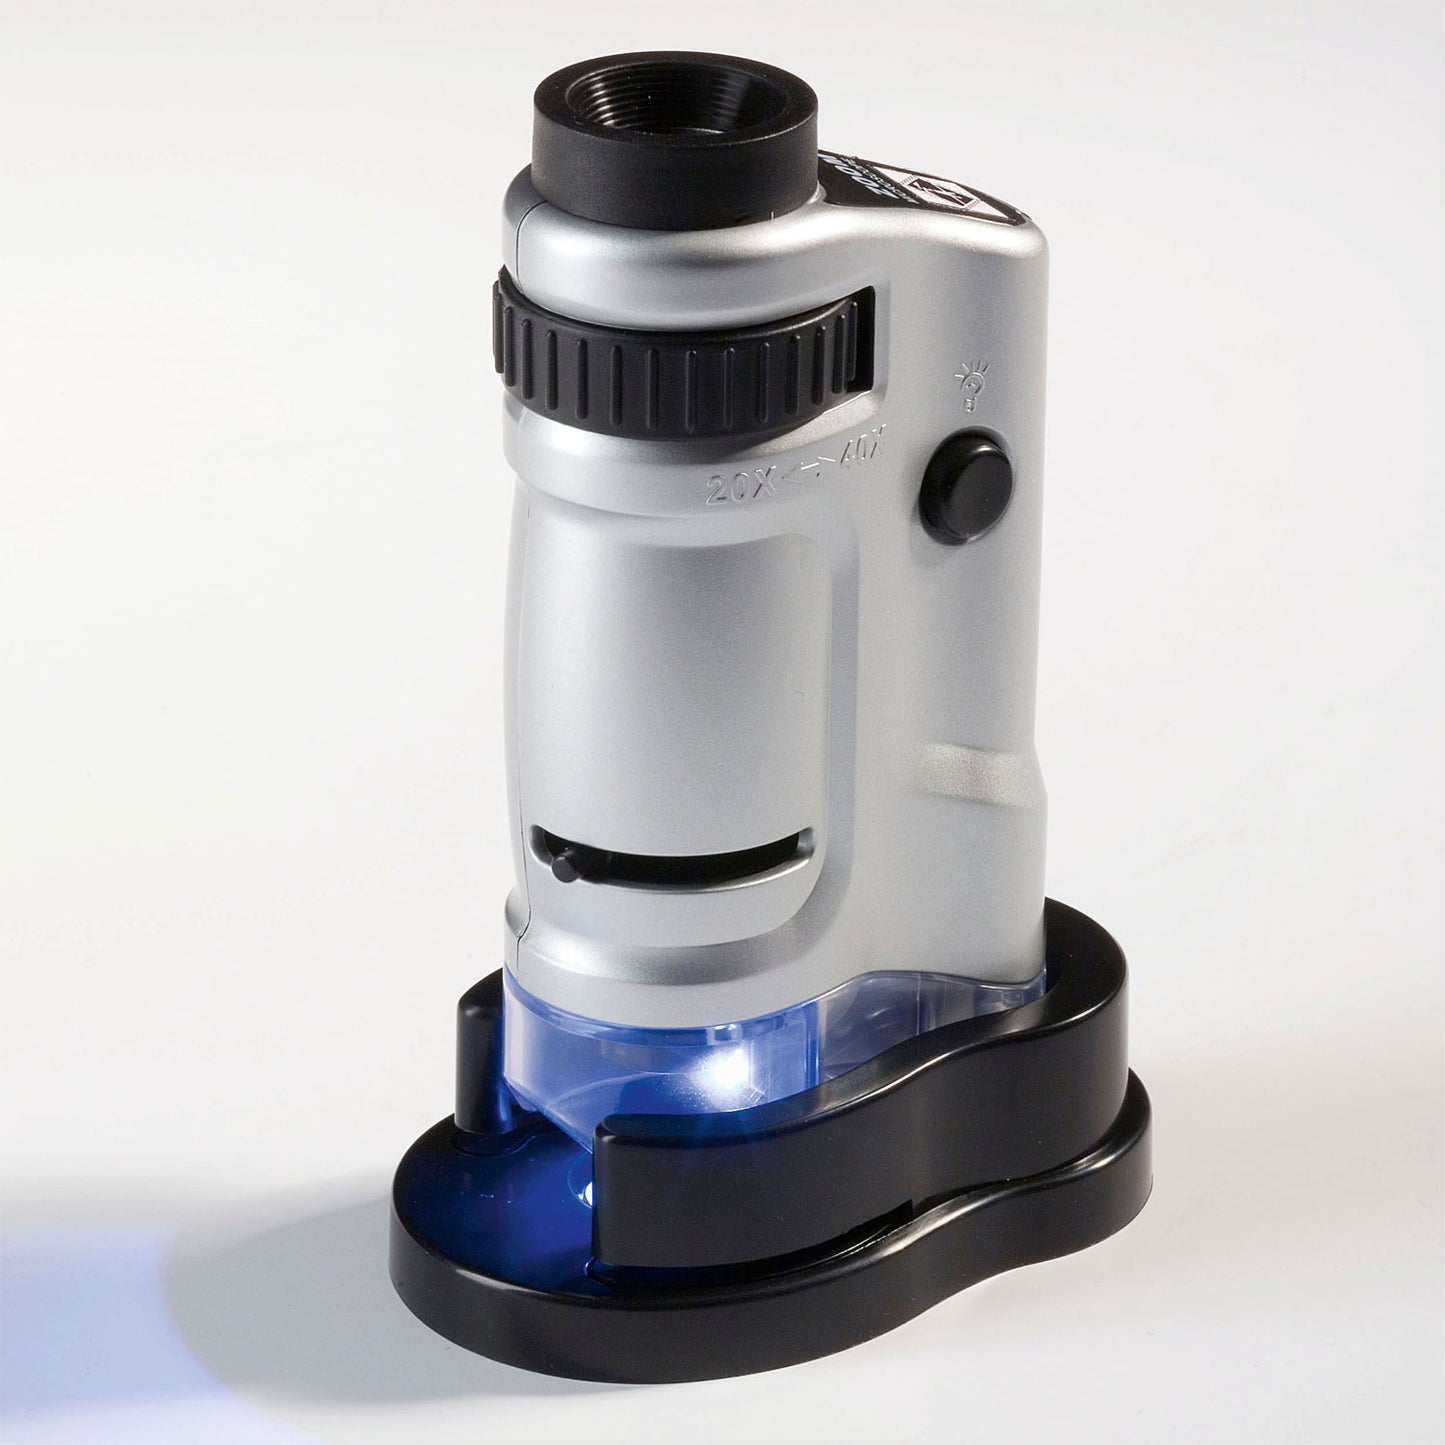 Lighthouse Zoom Microscope with 20x-40x Magnification